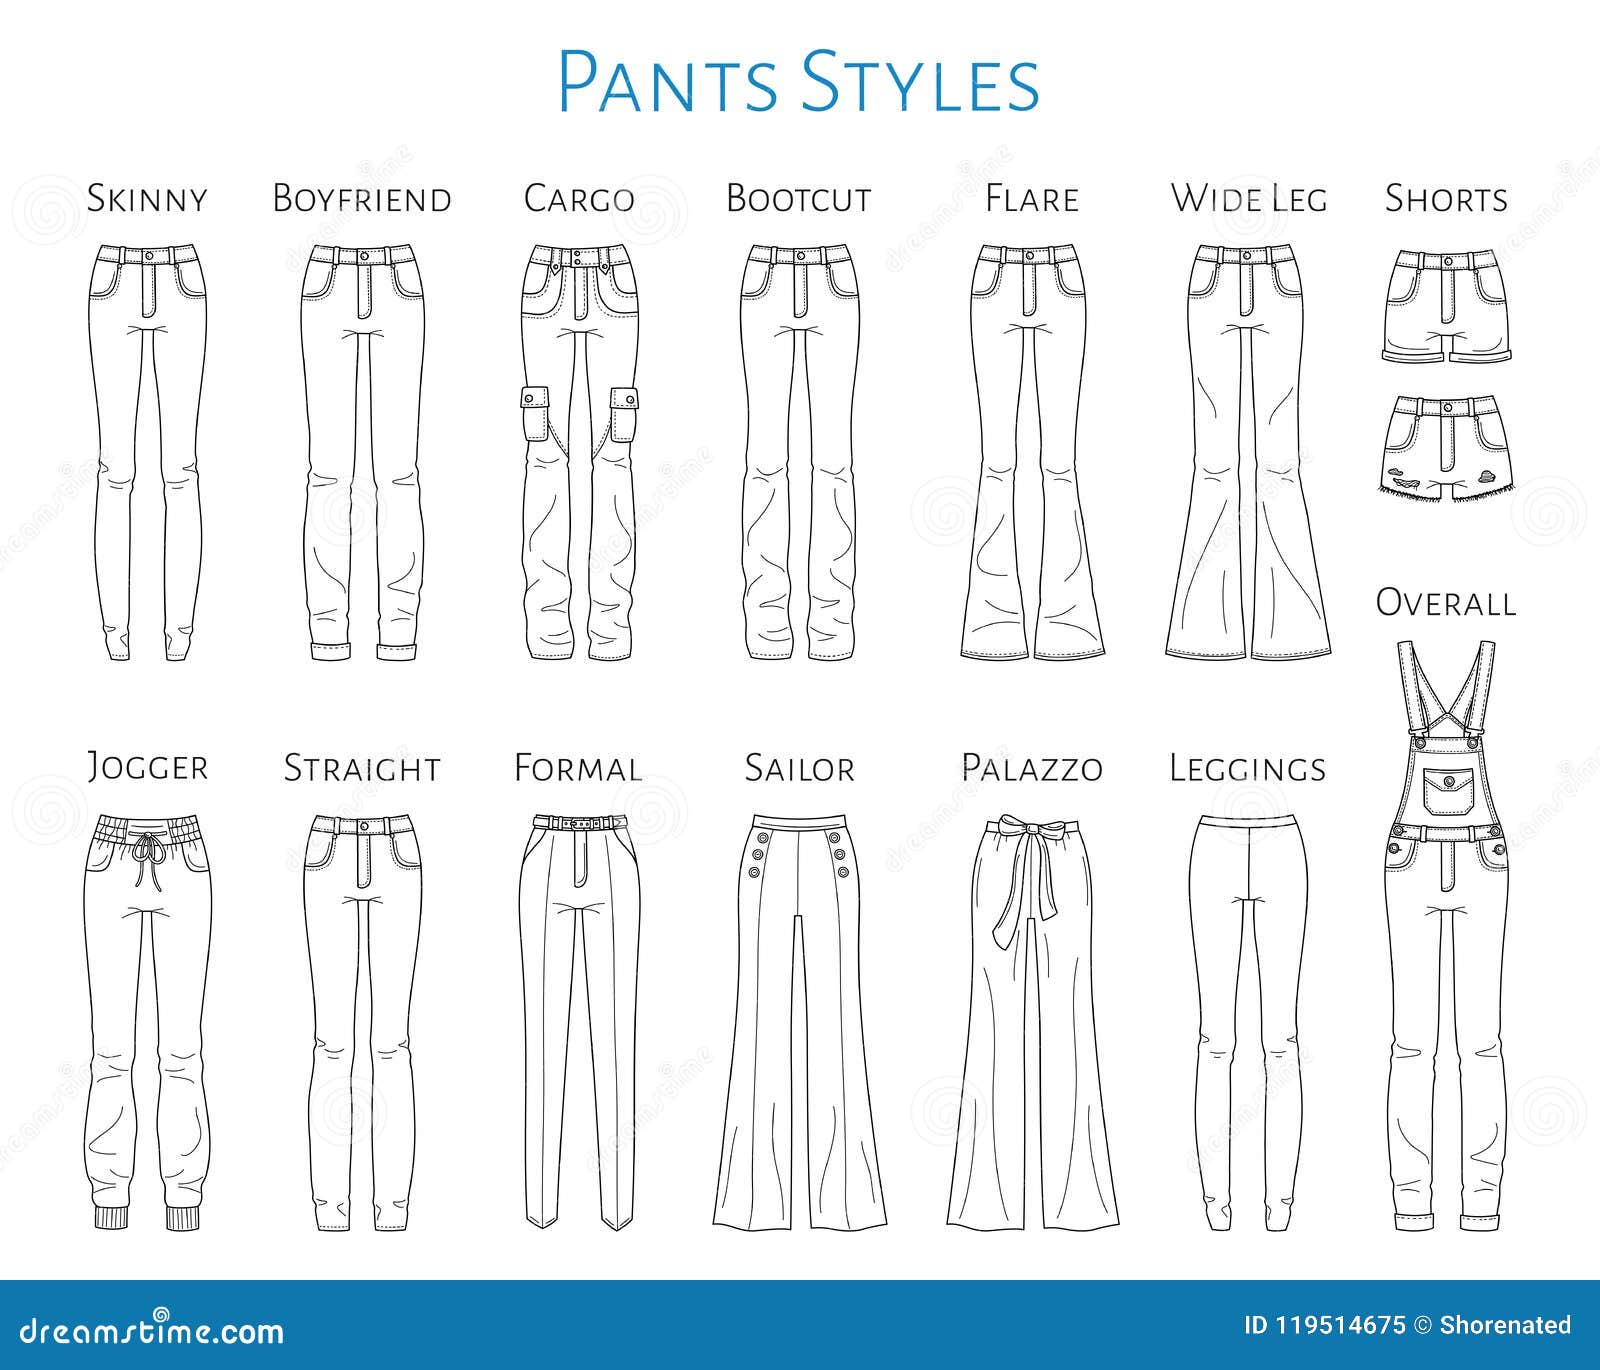 22 Types of pants - Can you ame each one of them? - SewGuide